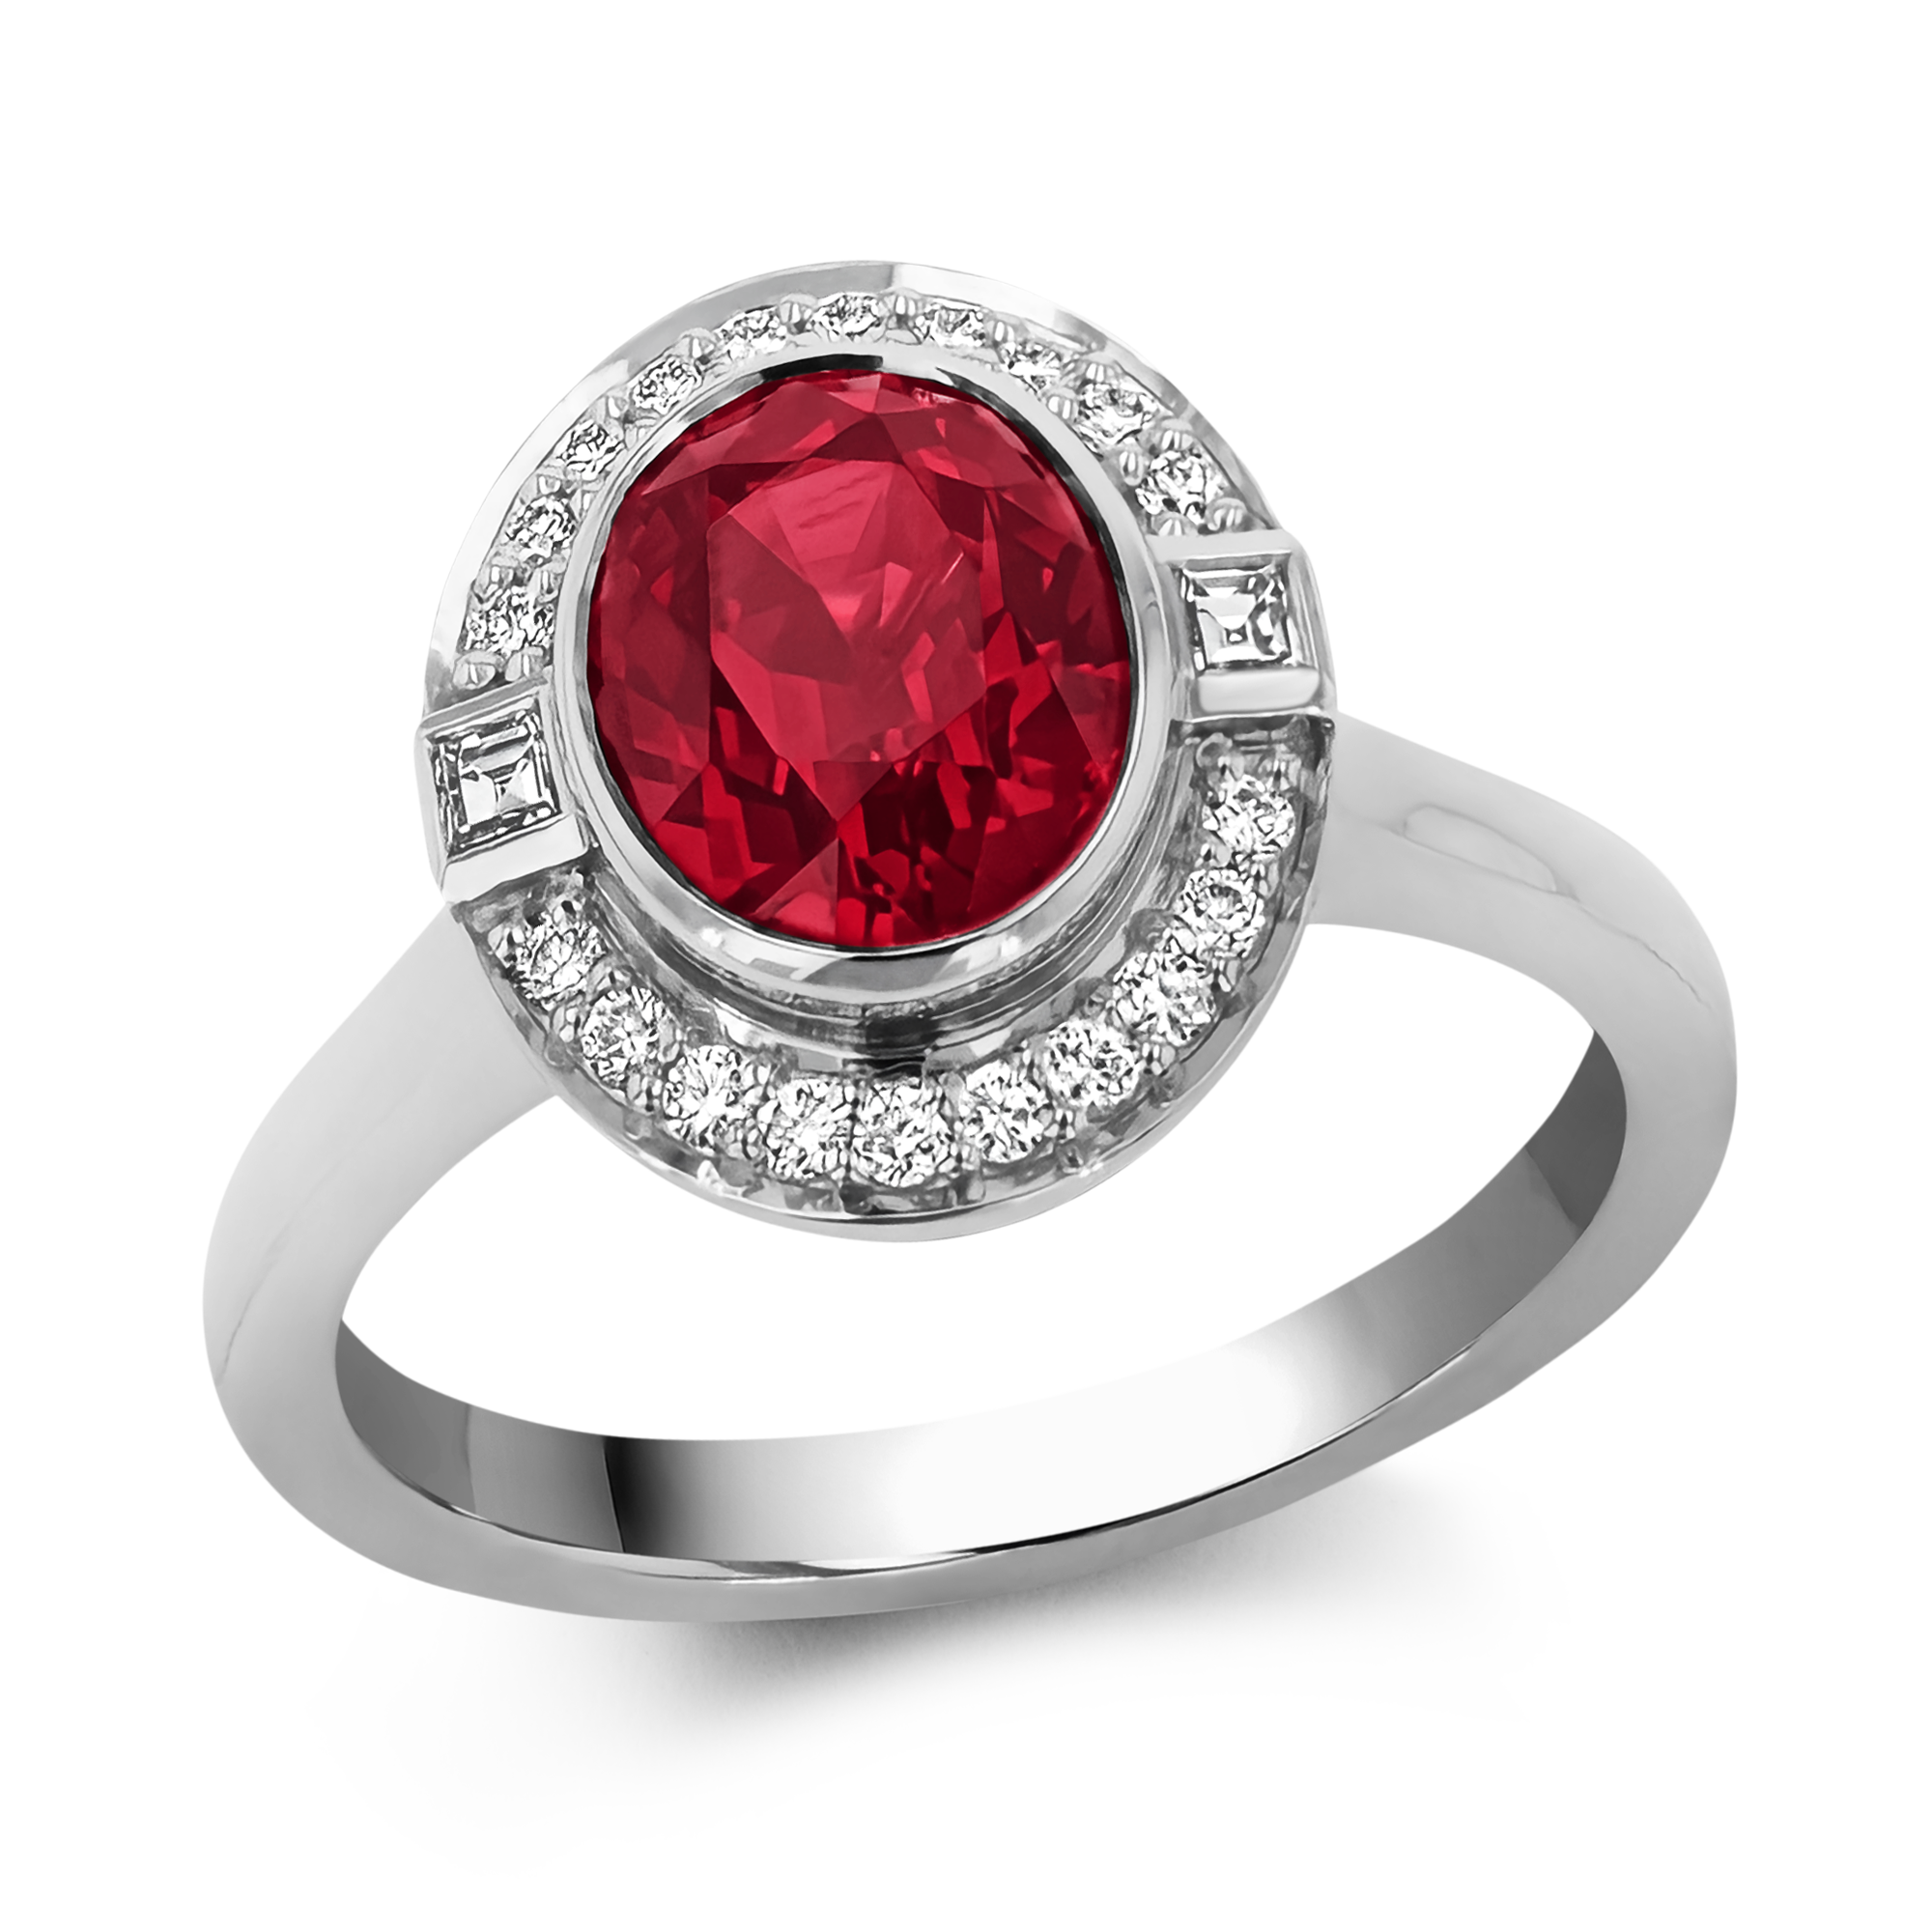 Mozambique 3.01ct Ruby and Diamond Cluster Ring Oval Cut, Rubover Set_1